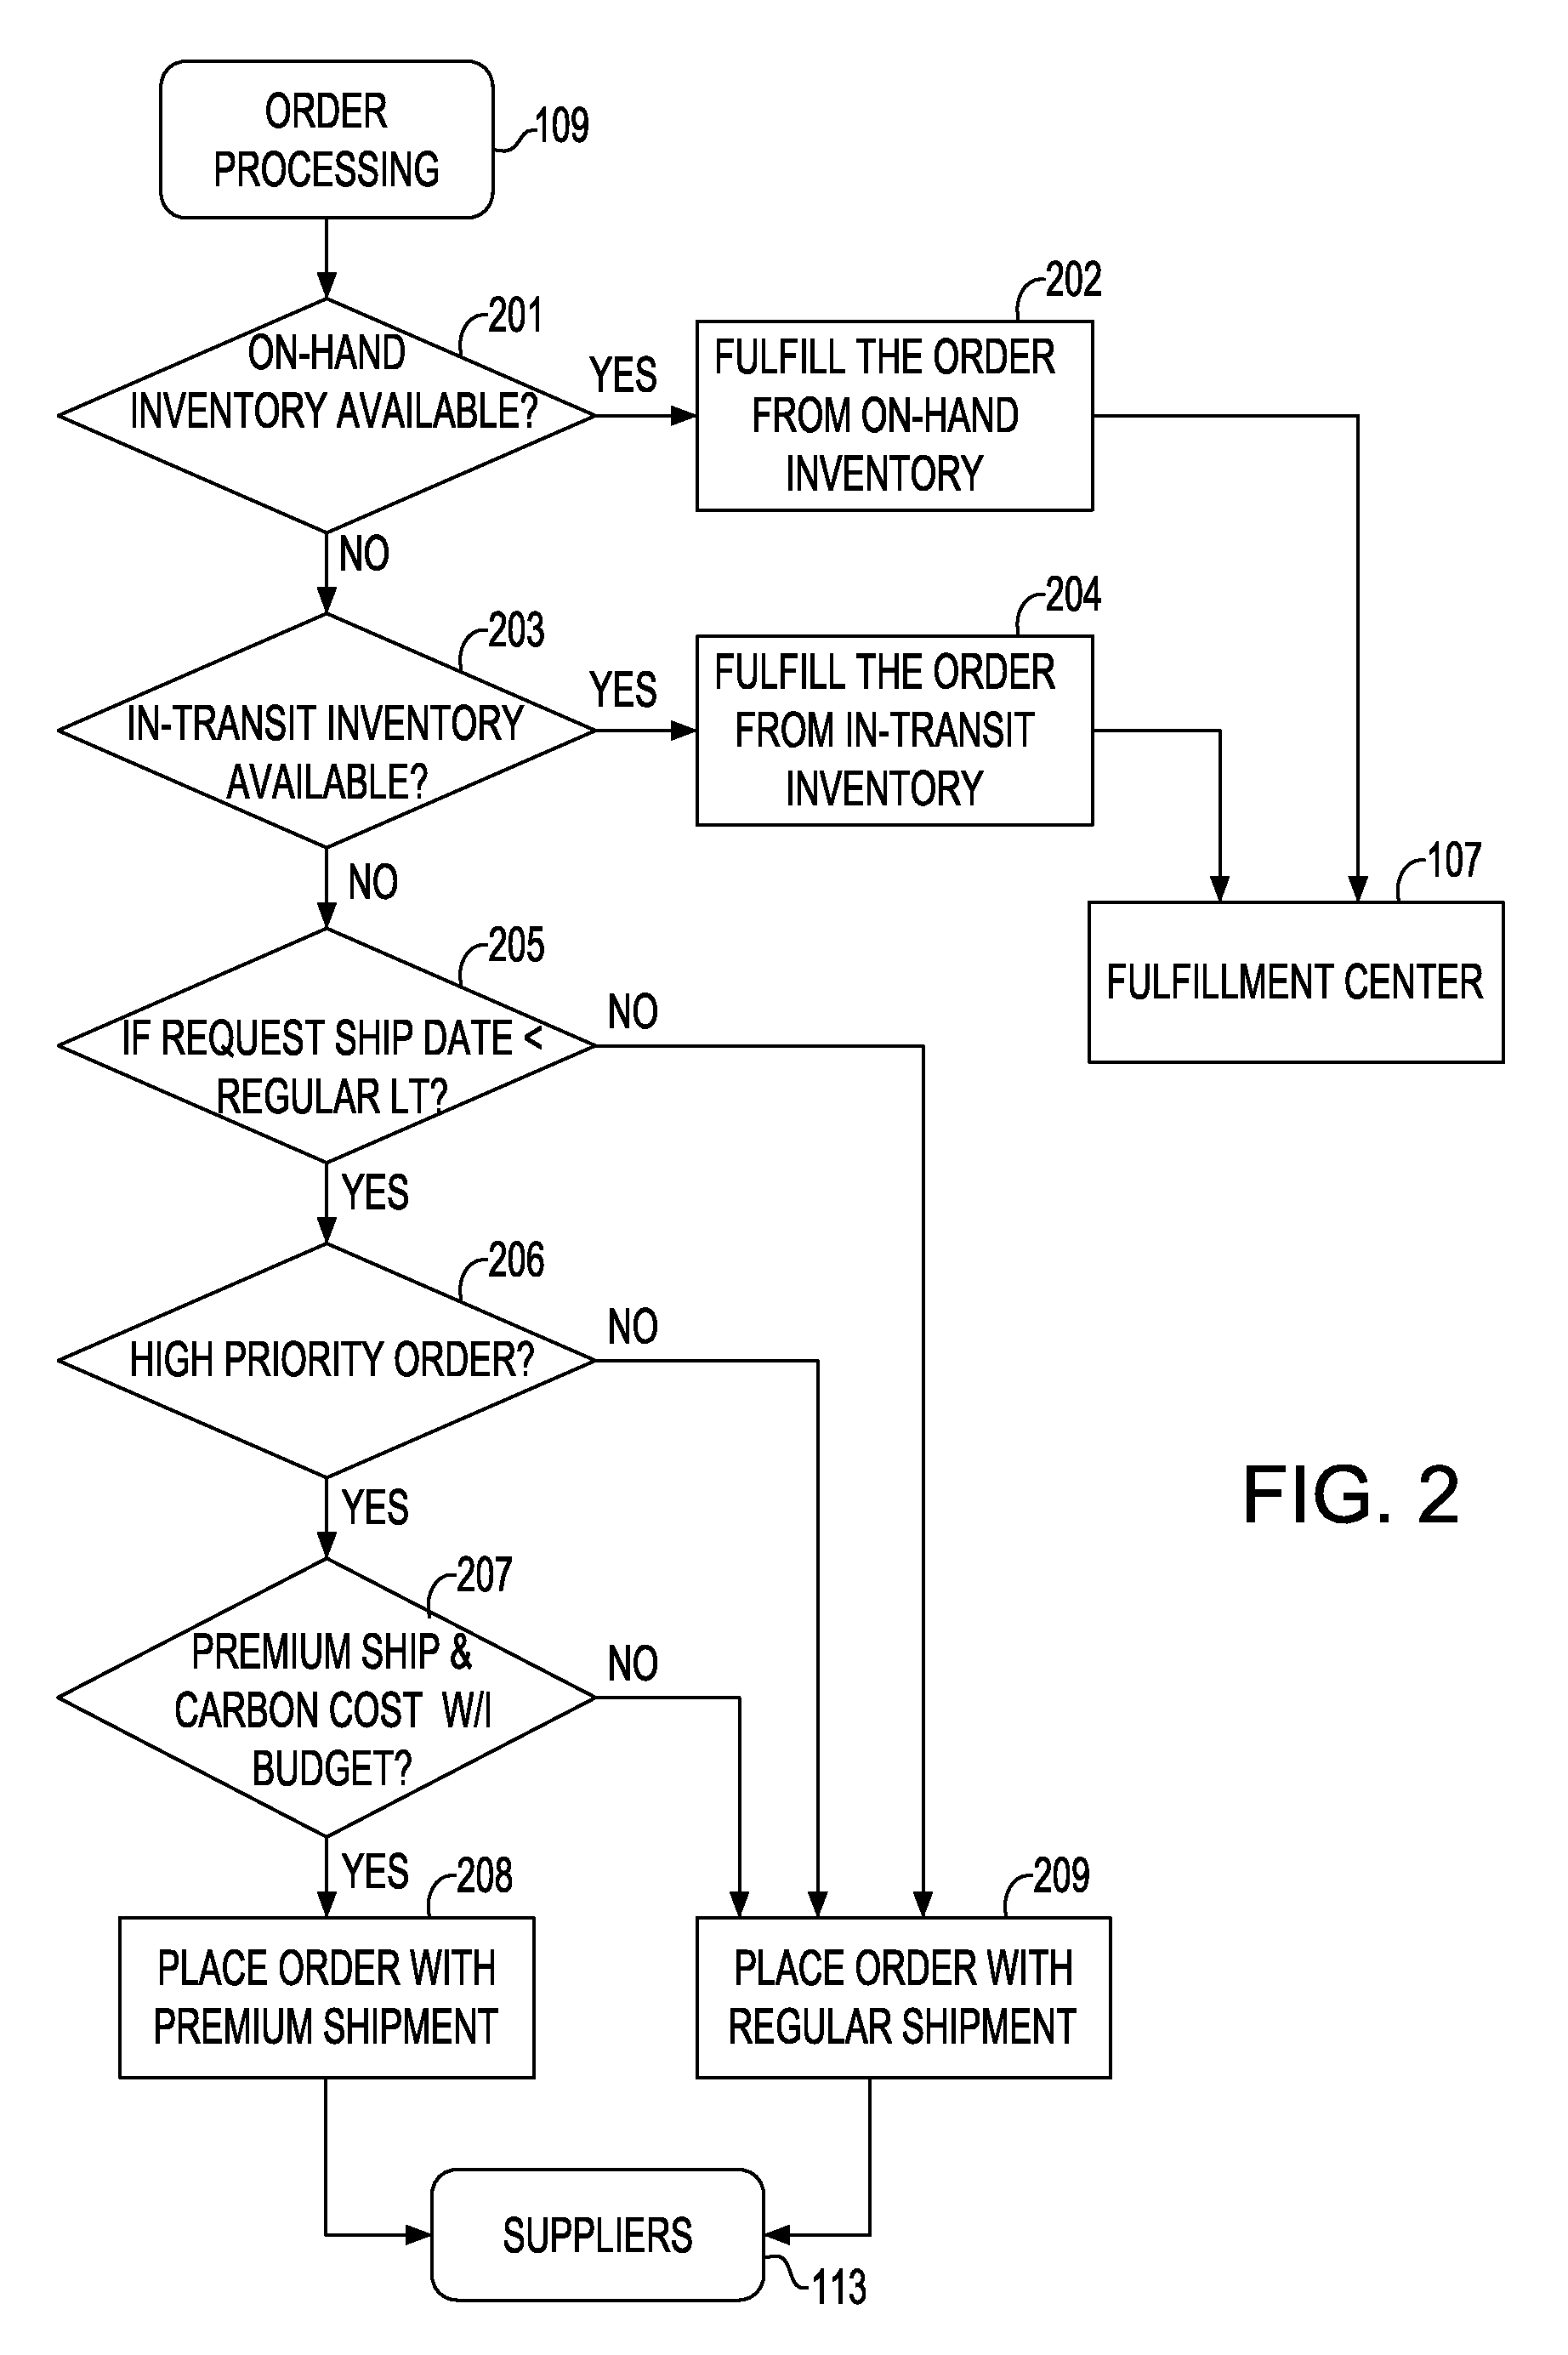 System and method for determining carbon emission-conscious order fulfillment alternatives with multiple supply modes